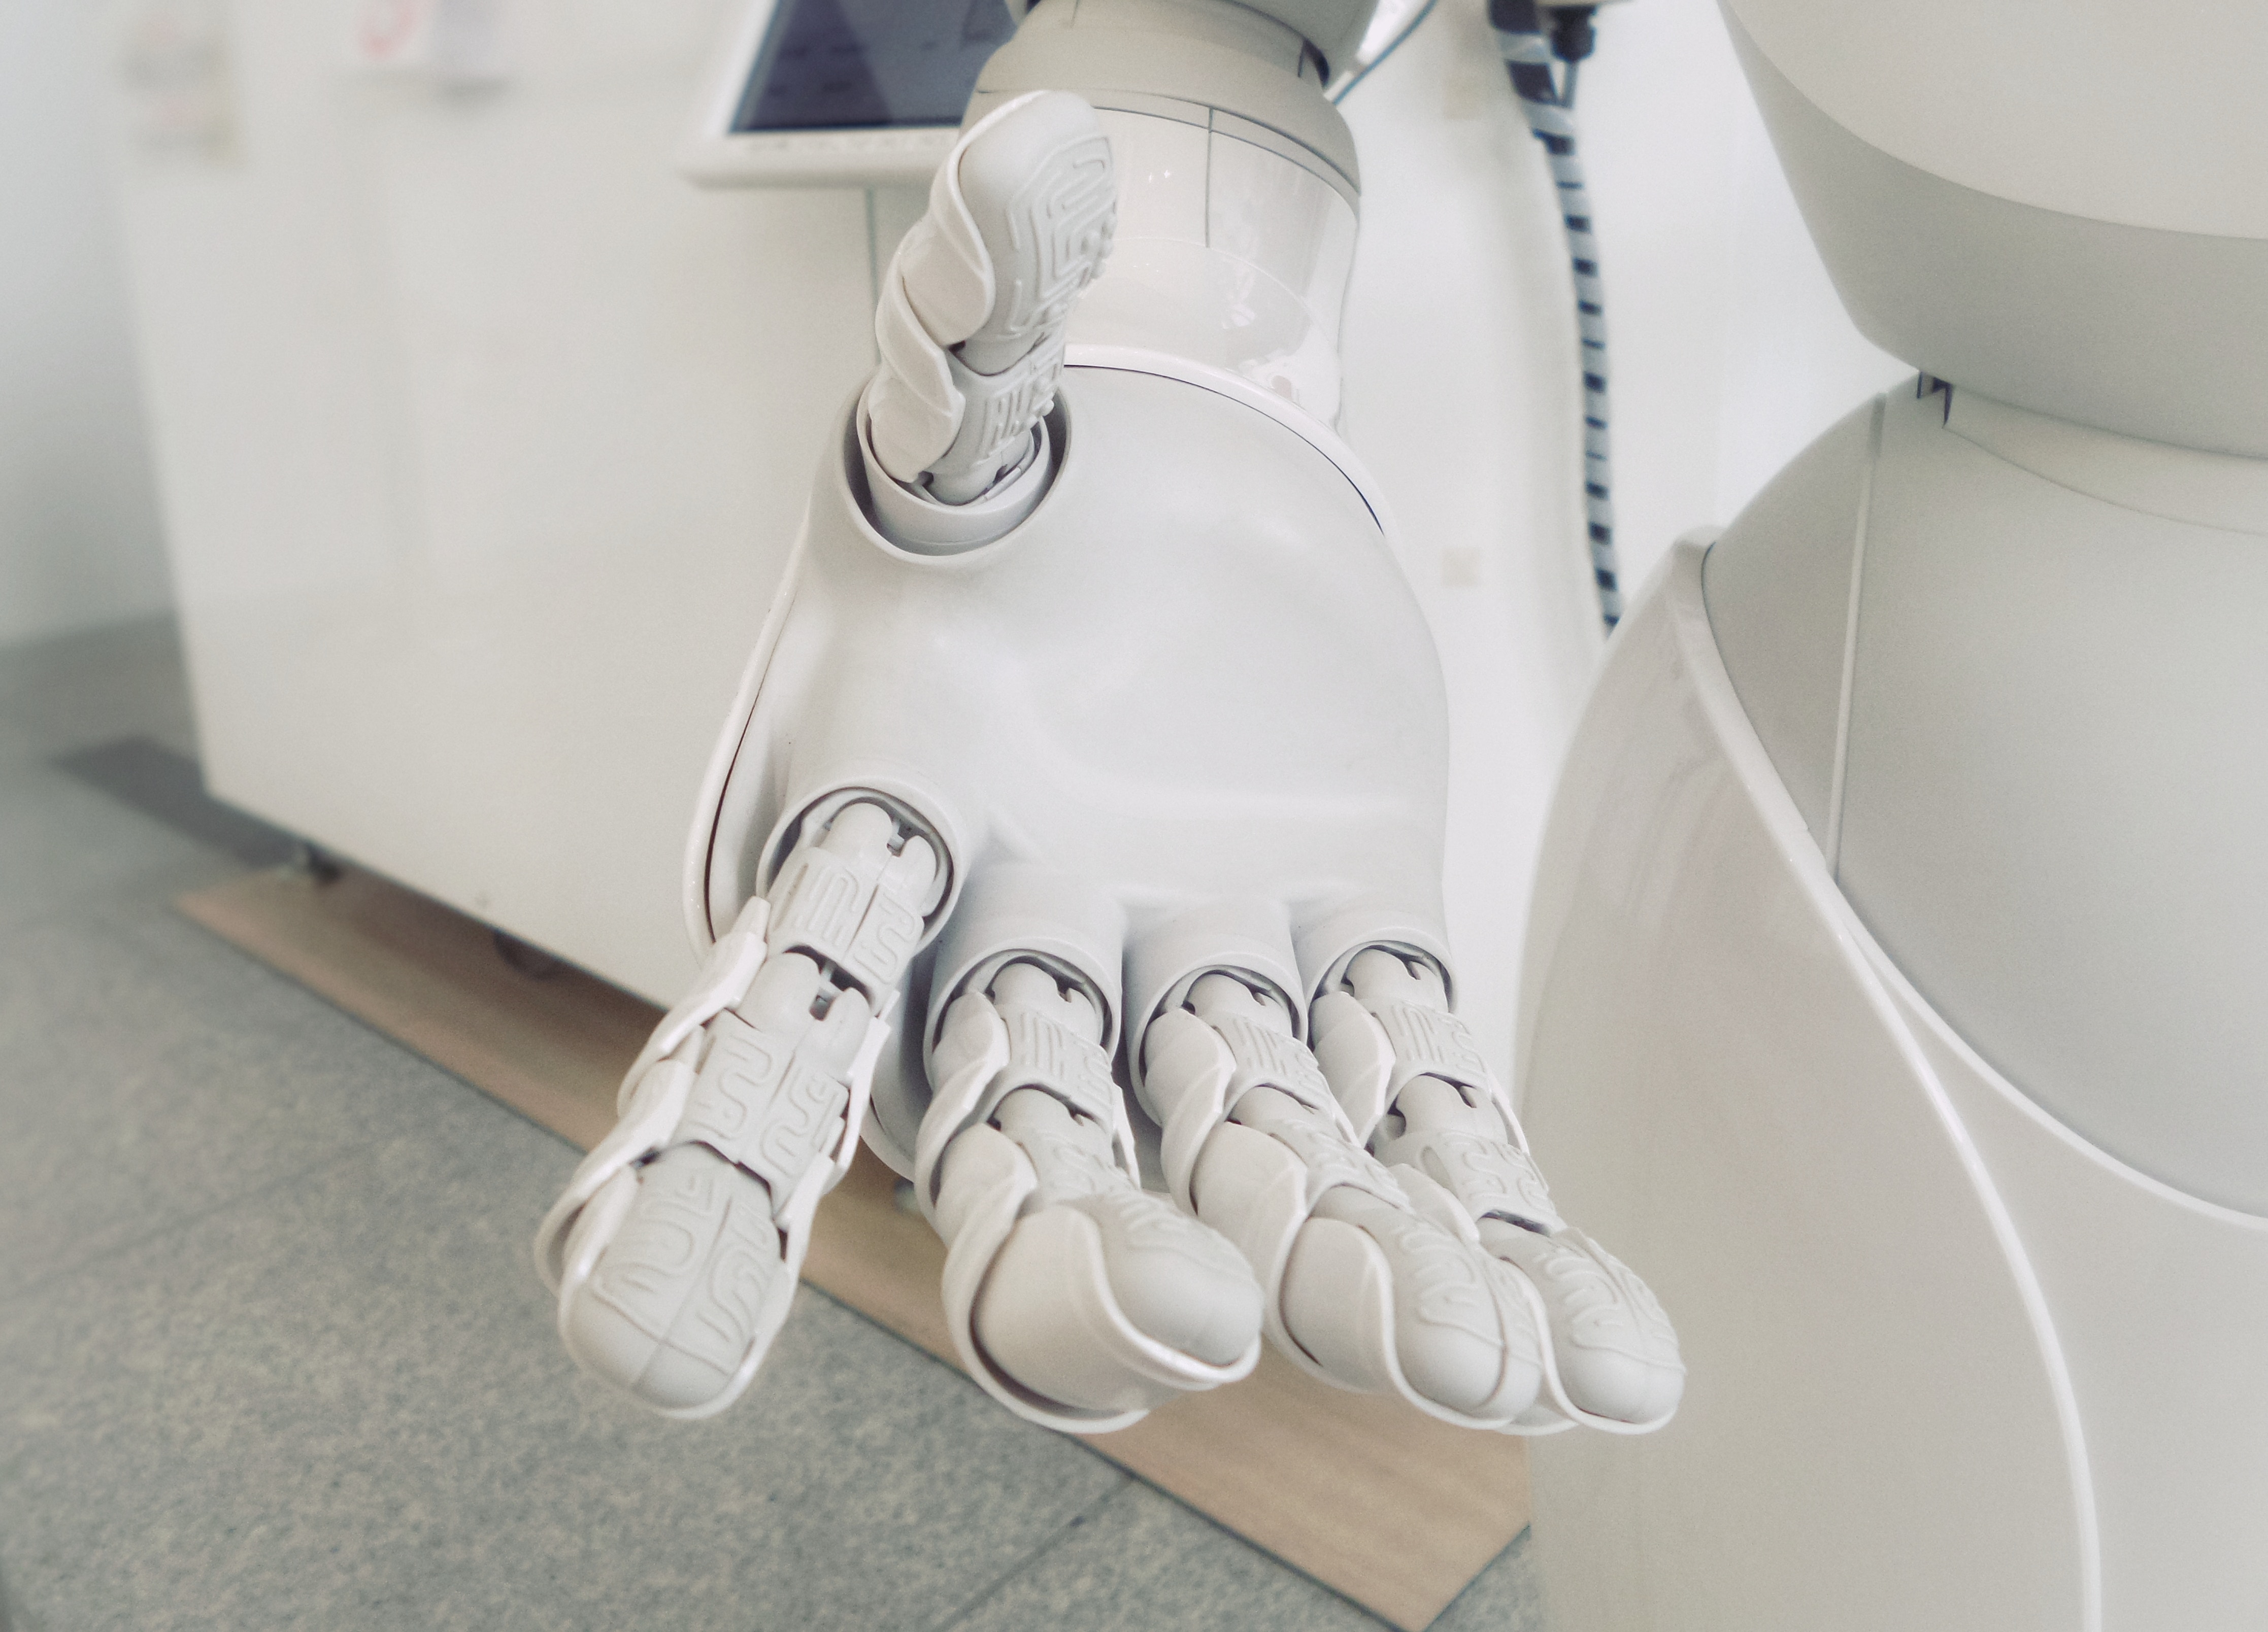 AI can positively impact healthcare without reducing jobs. Check out this article to find out how!